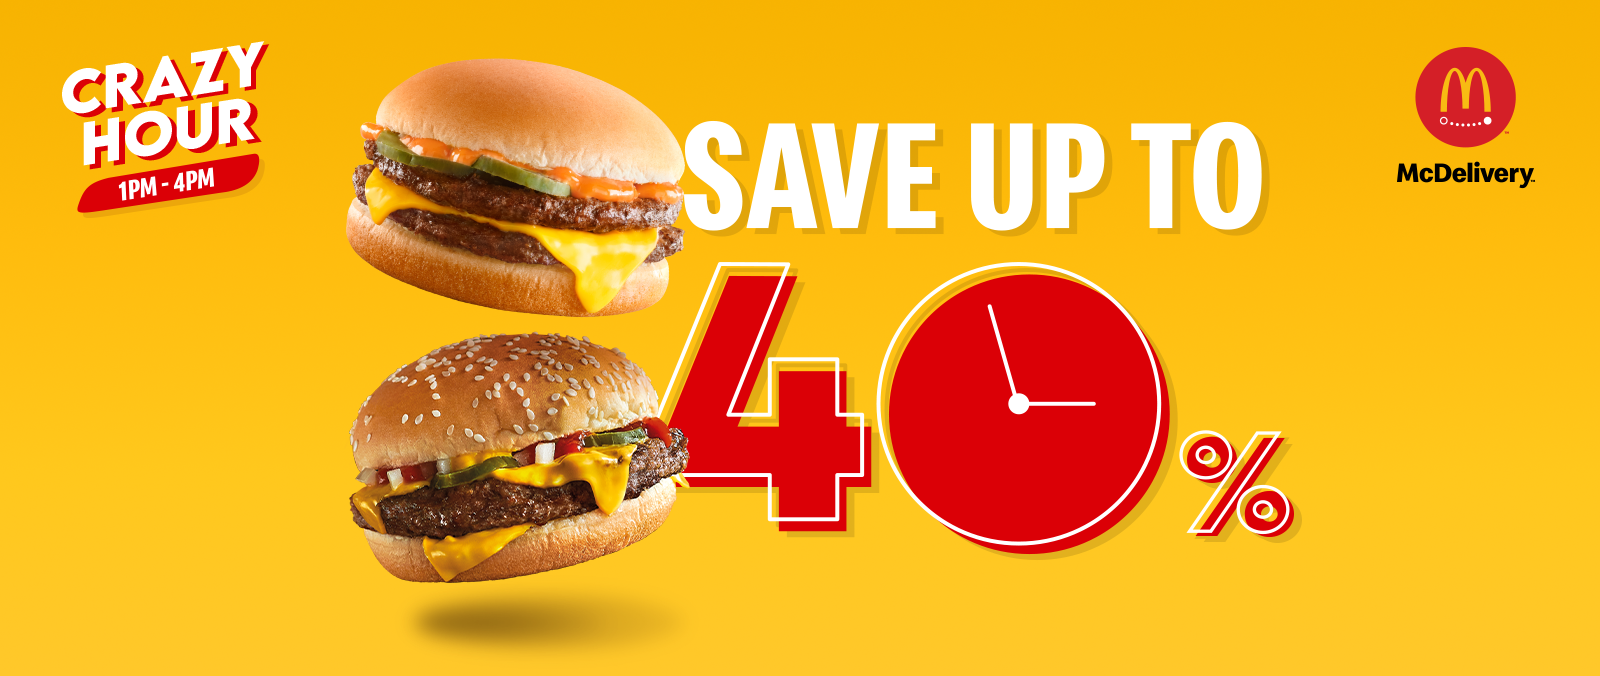 Daily savings of up to 40% with McDelivery Crazy Hour!'s image'